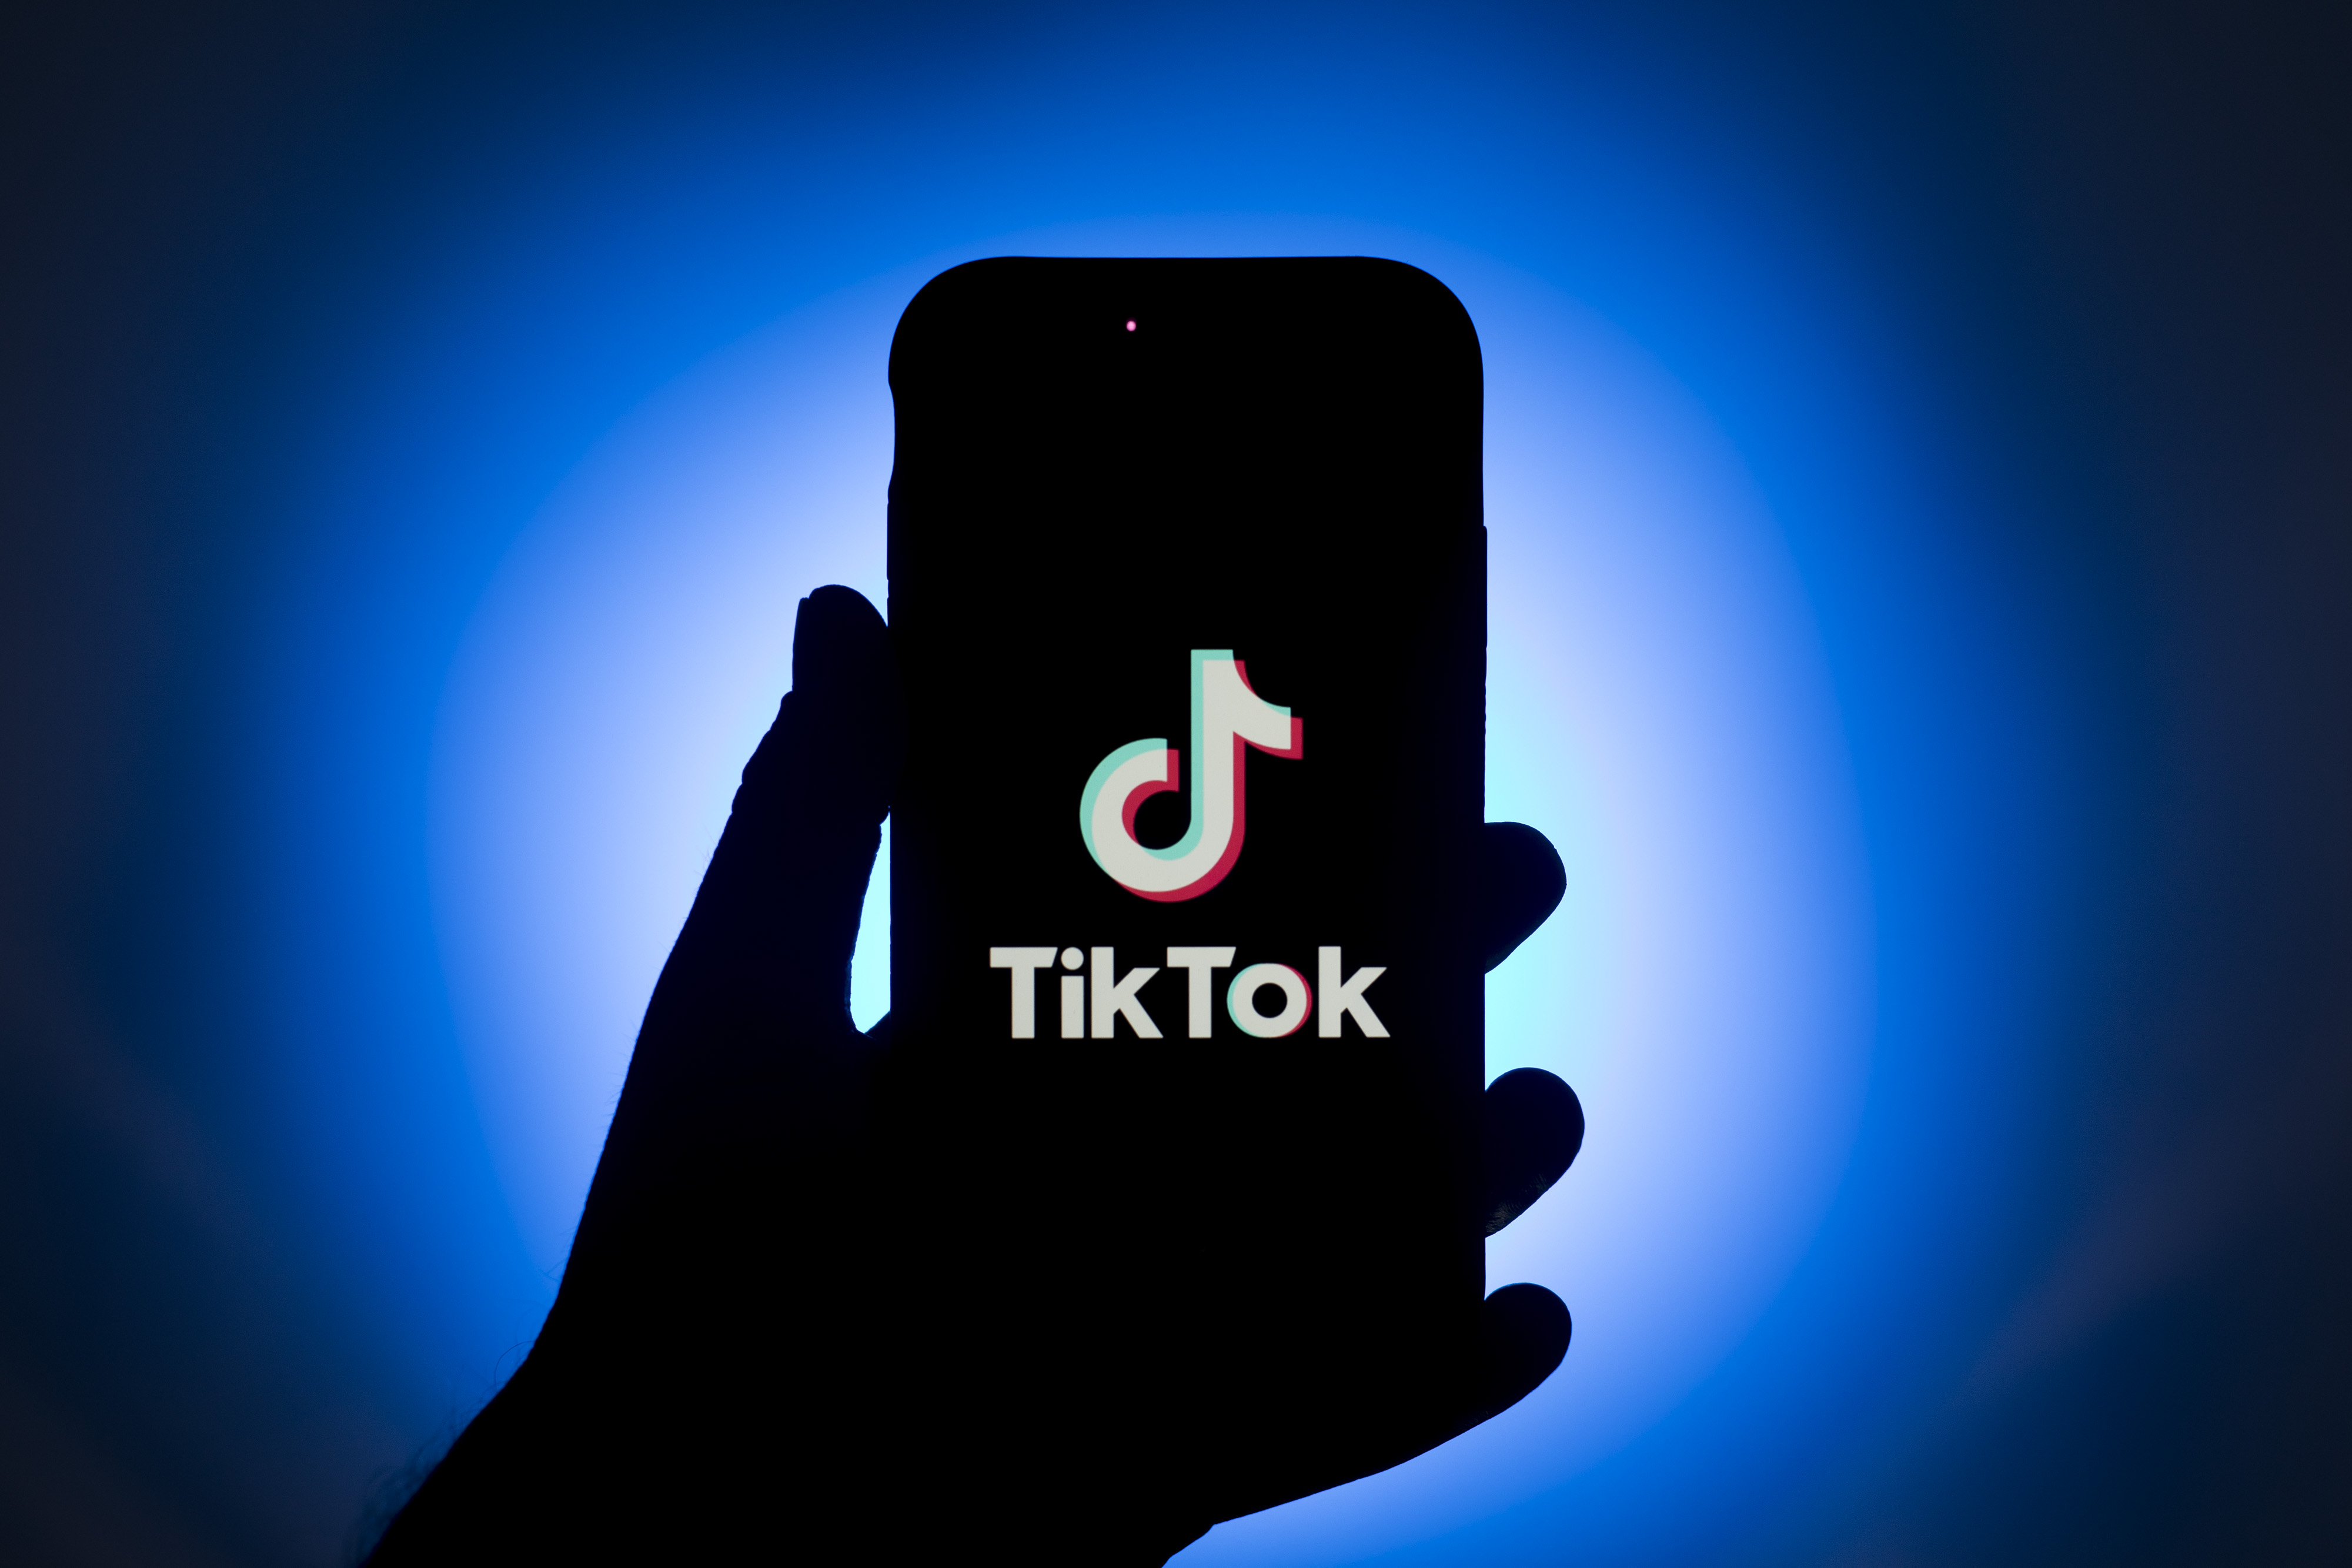 China Uses TikTok to Expand Influence Globally, Lawmaker Says - Bloomberg